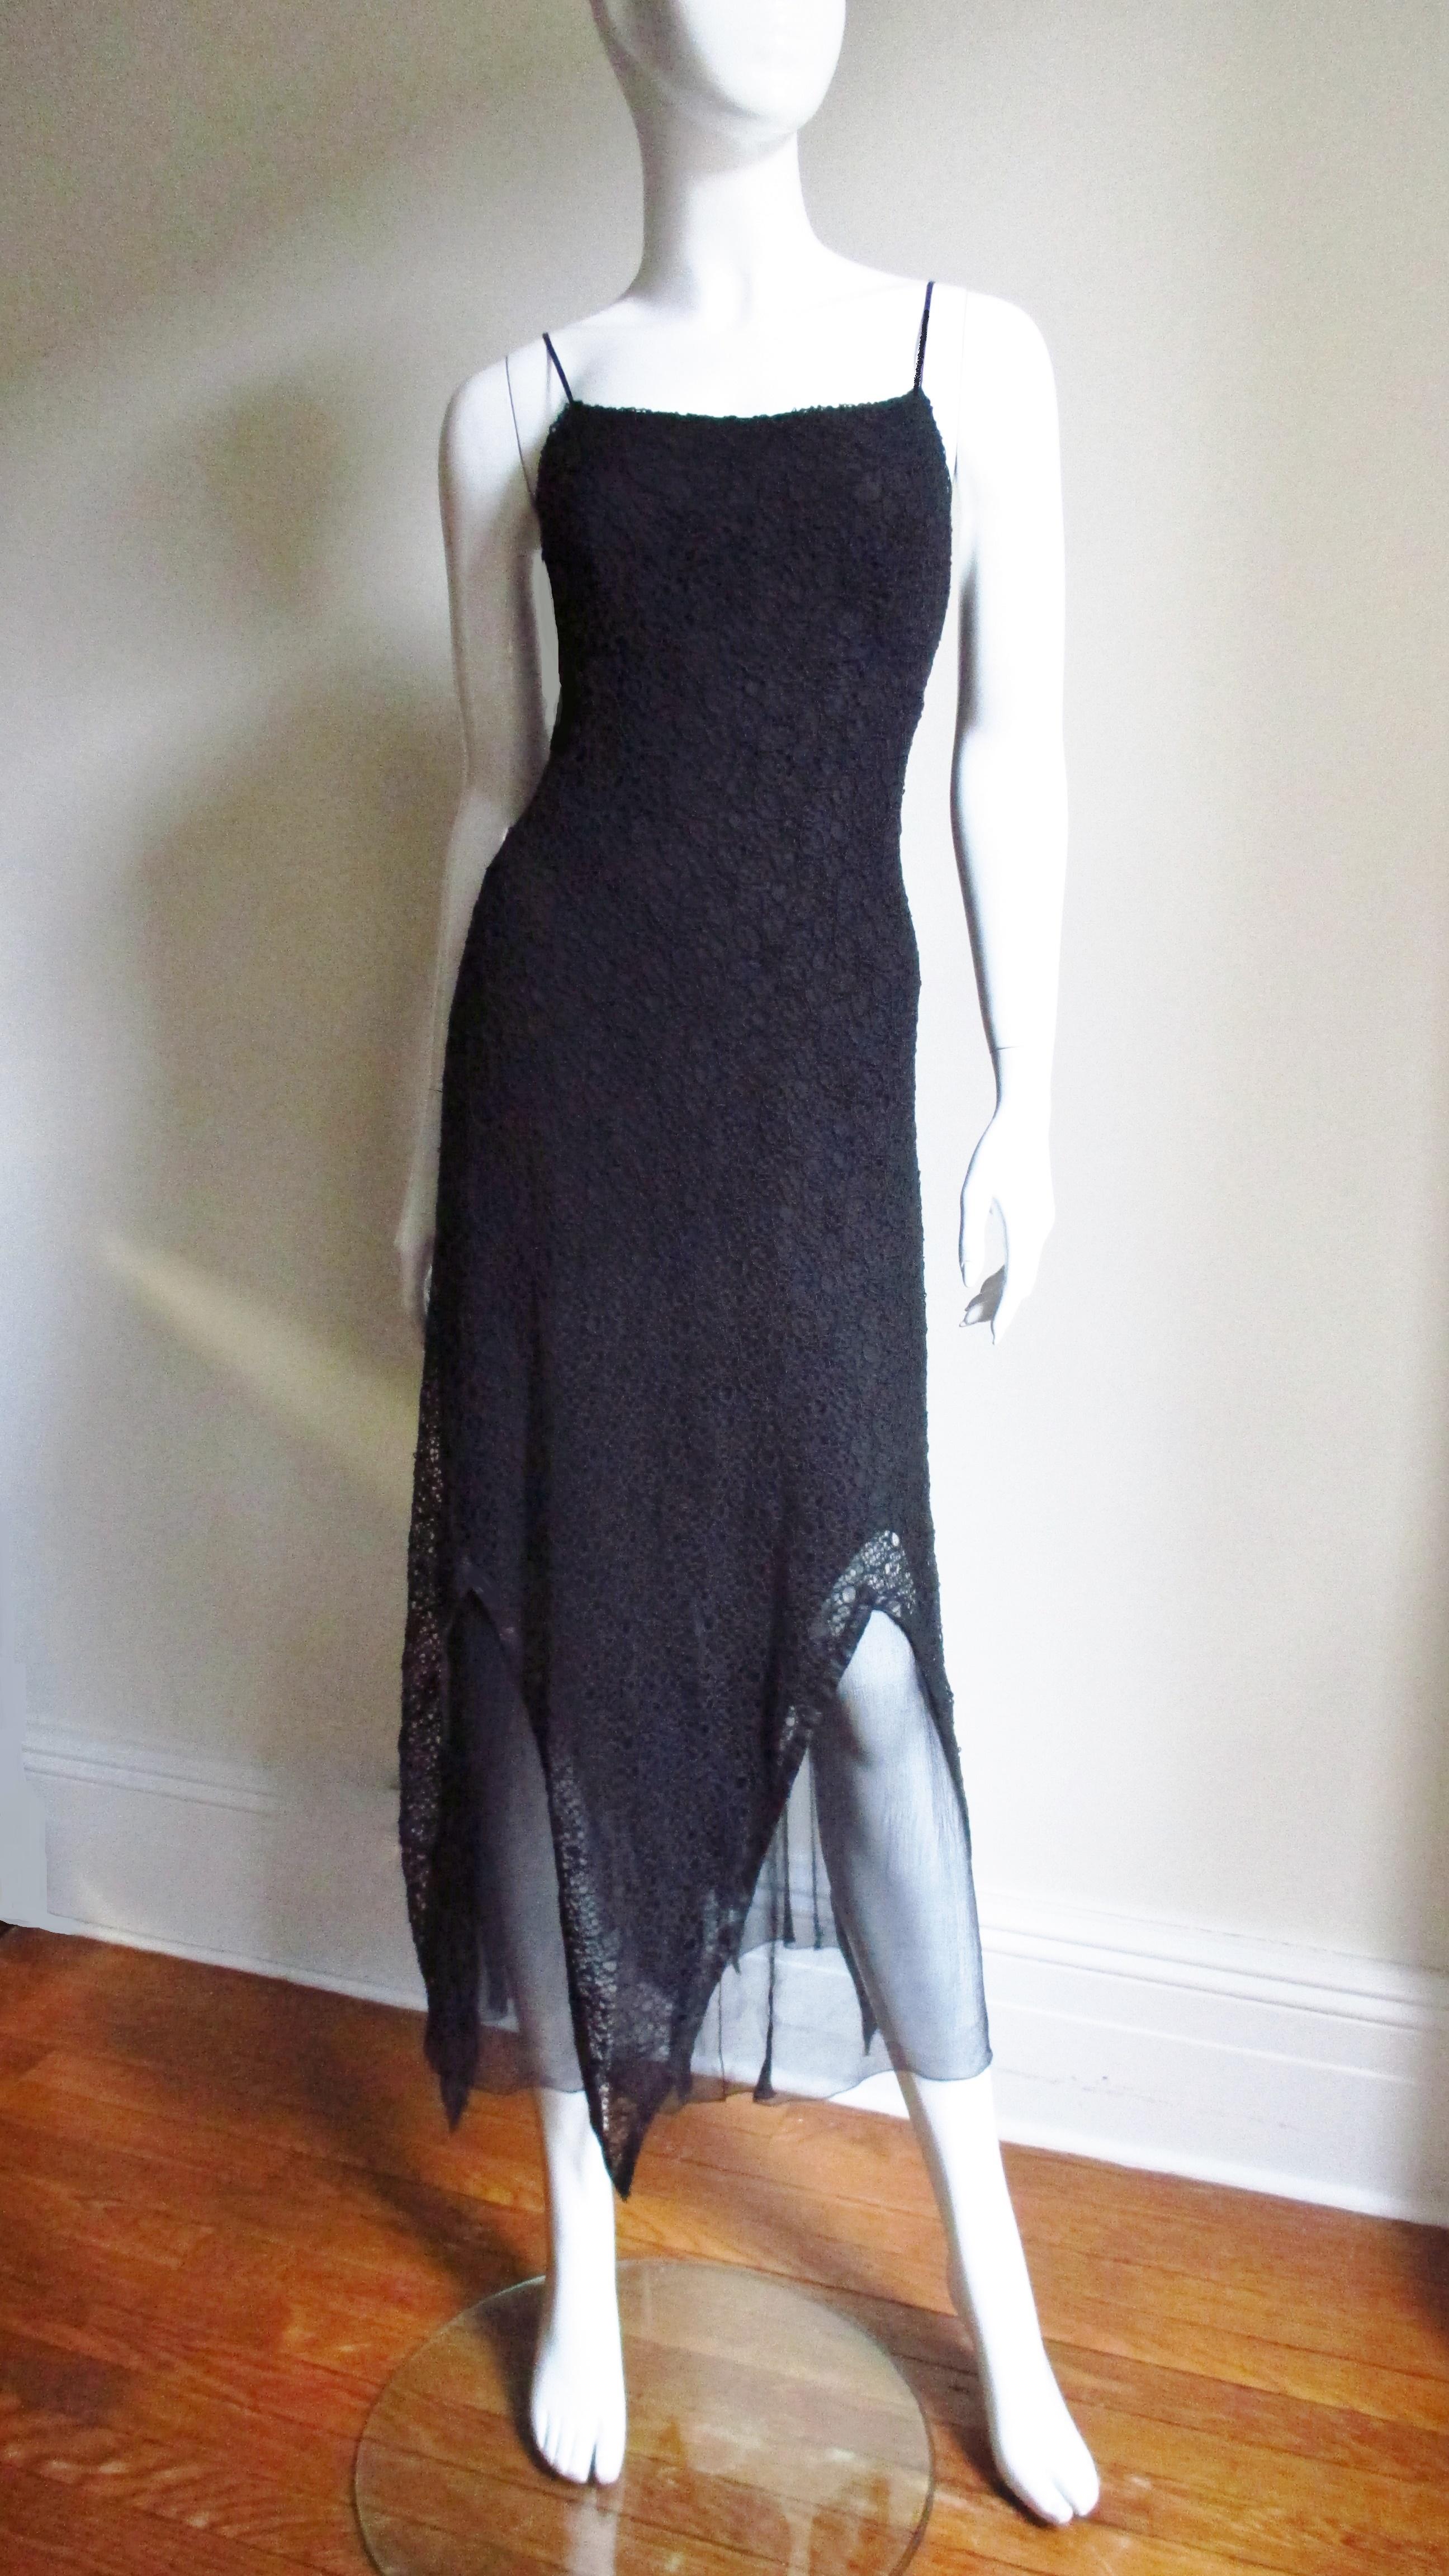 Karl Lagerfeld Silk Slip Dress 1990s In Excellent Condition For Sale In Water Mill, NY